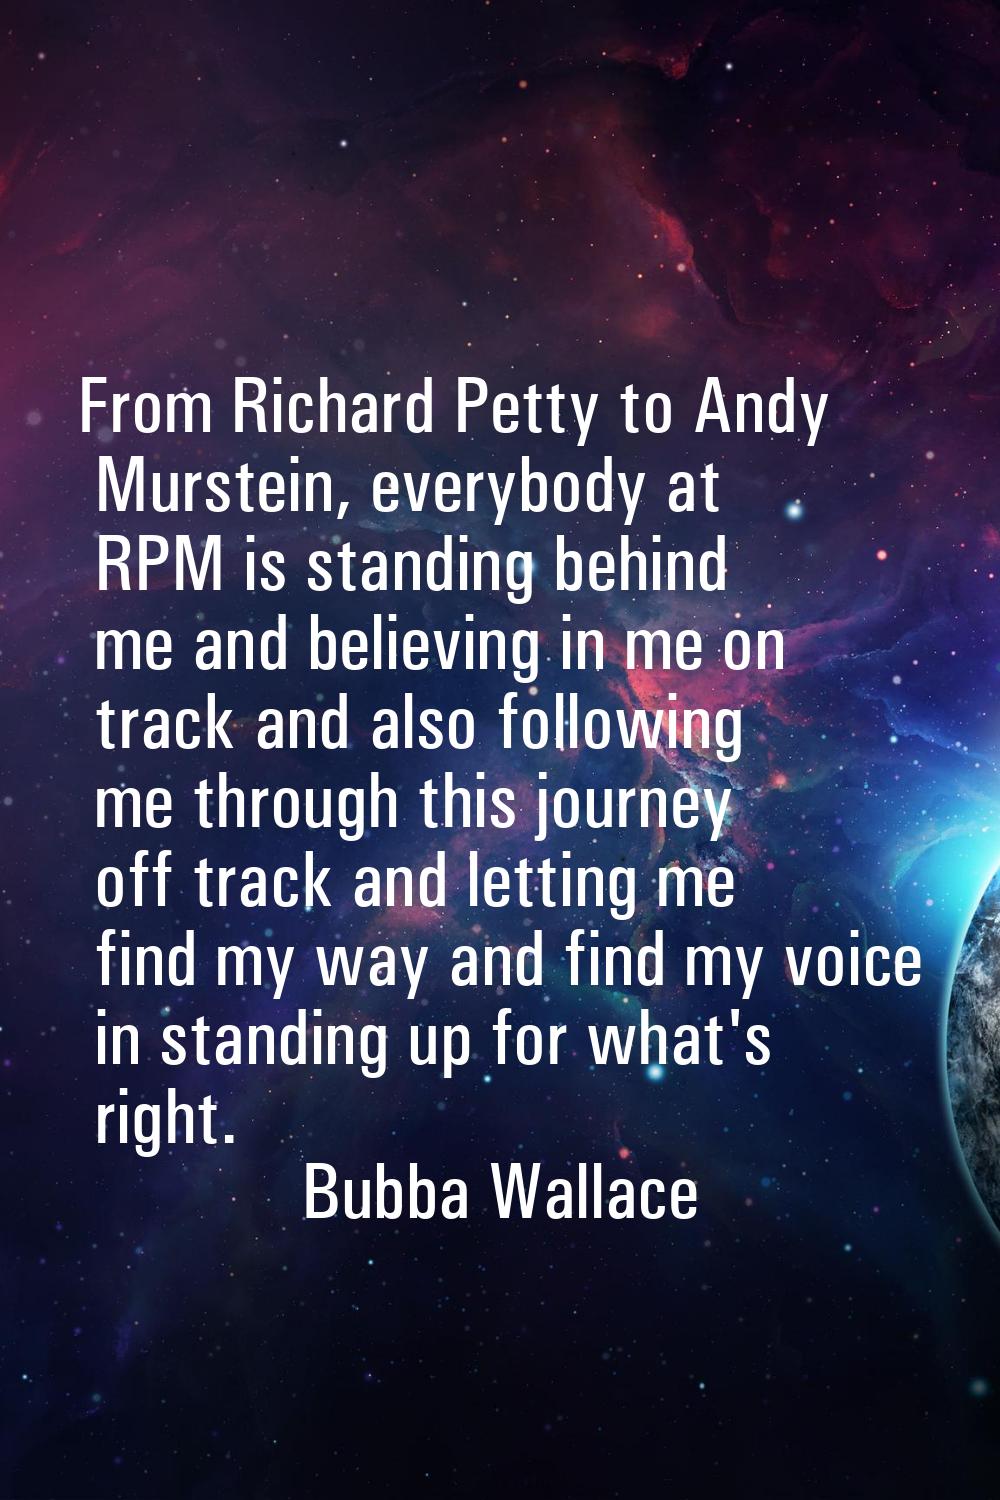 From Richard Petty to Andy Murstein, everybody at RPM is standing behind me and believing in me on 